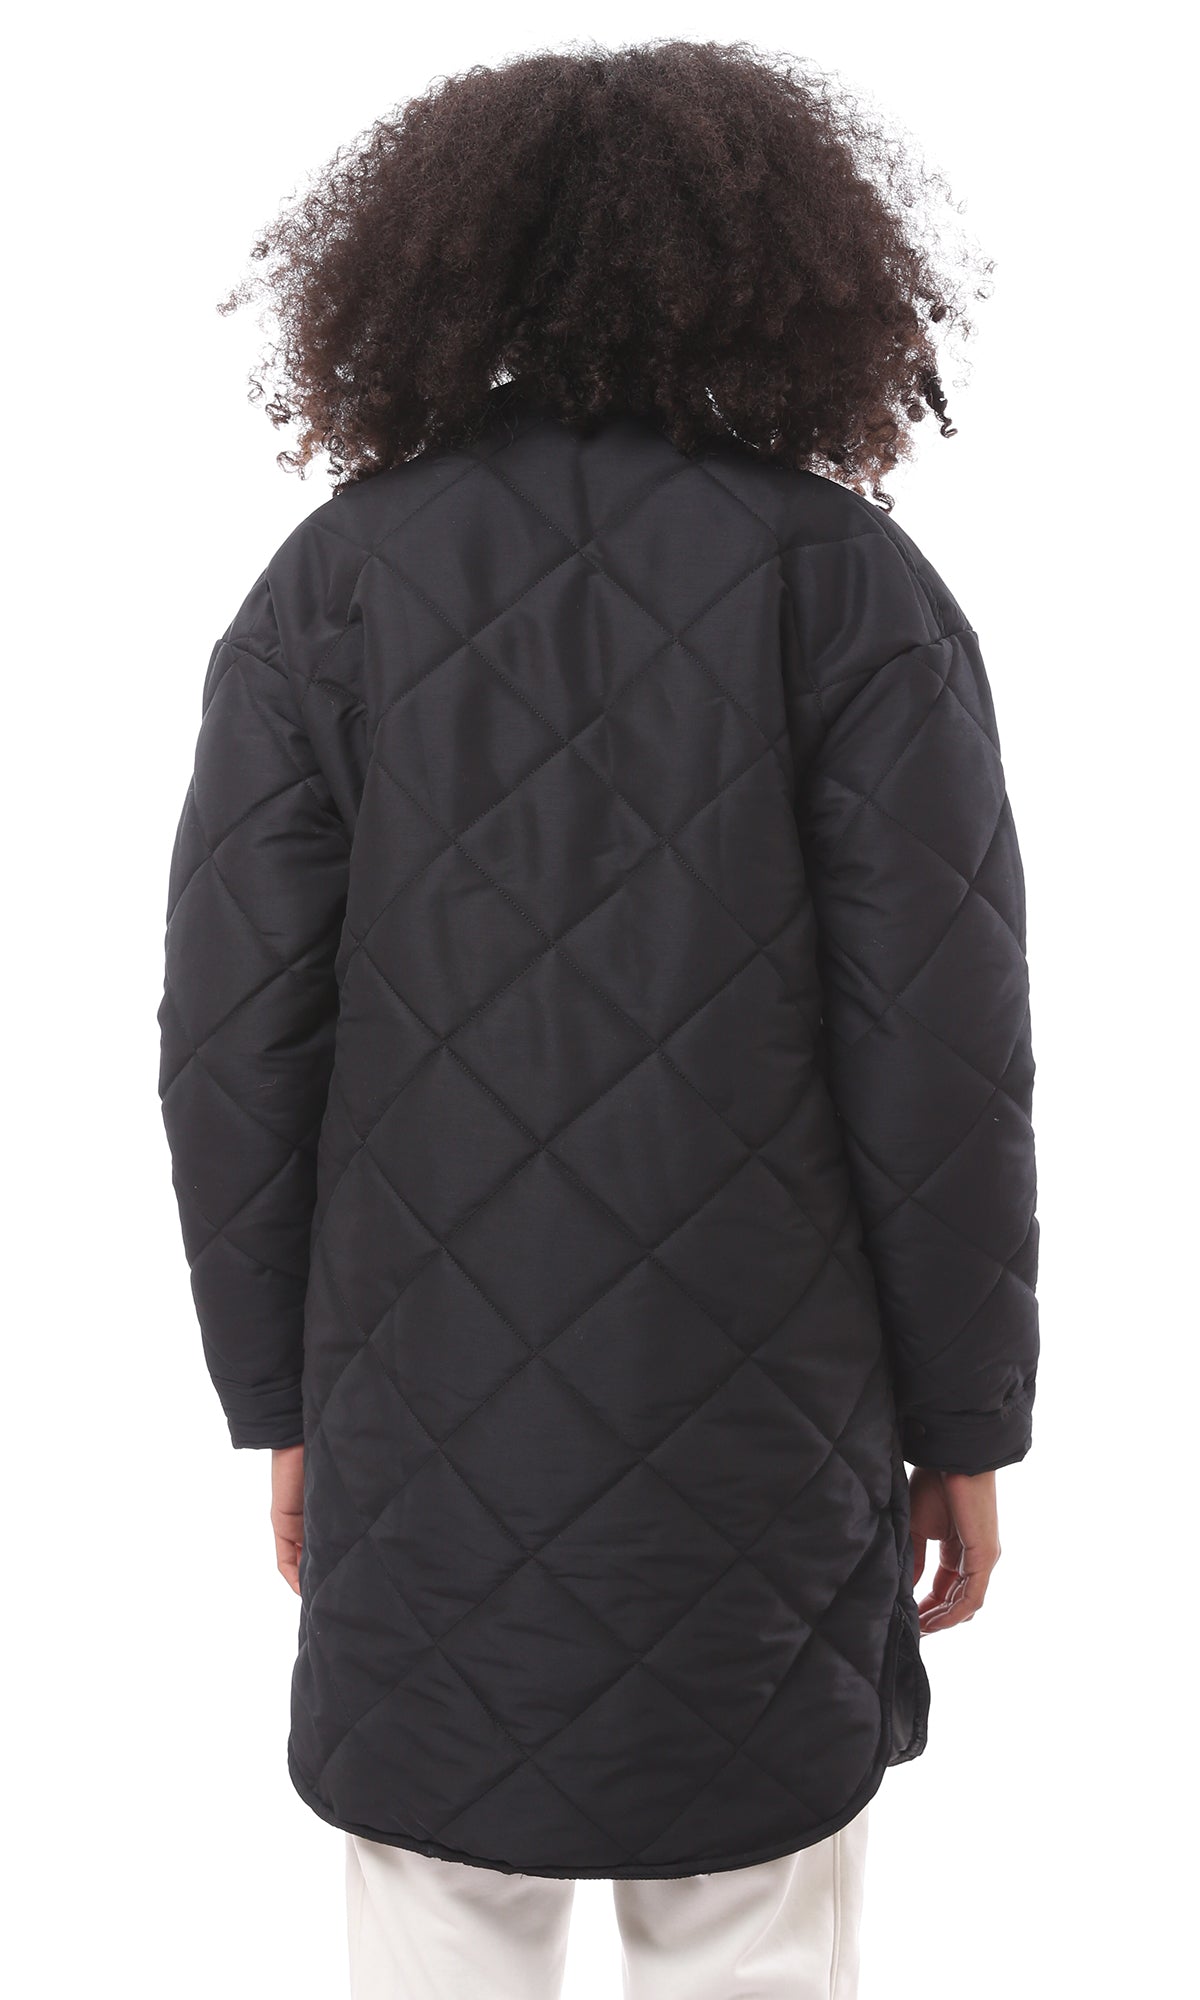 O171918 Diamond Quilted Black Bomber Coat